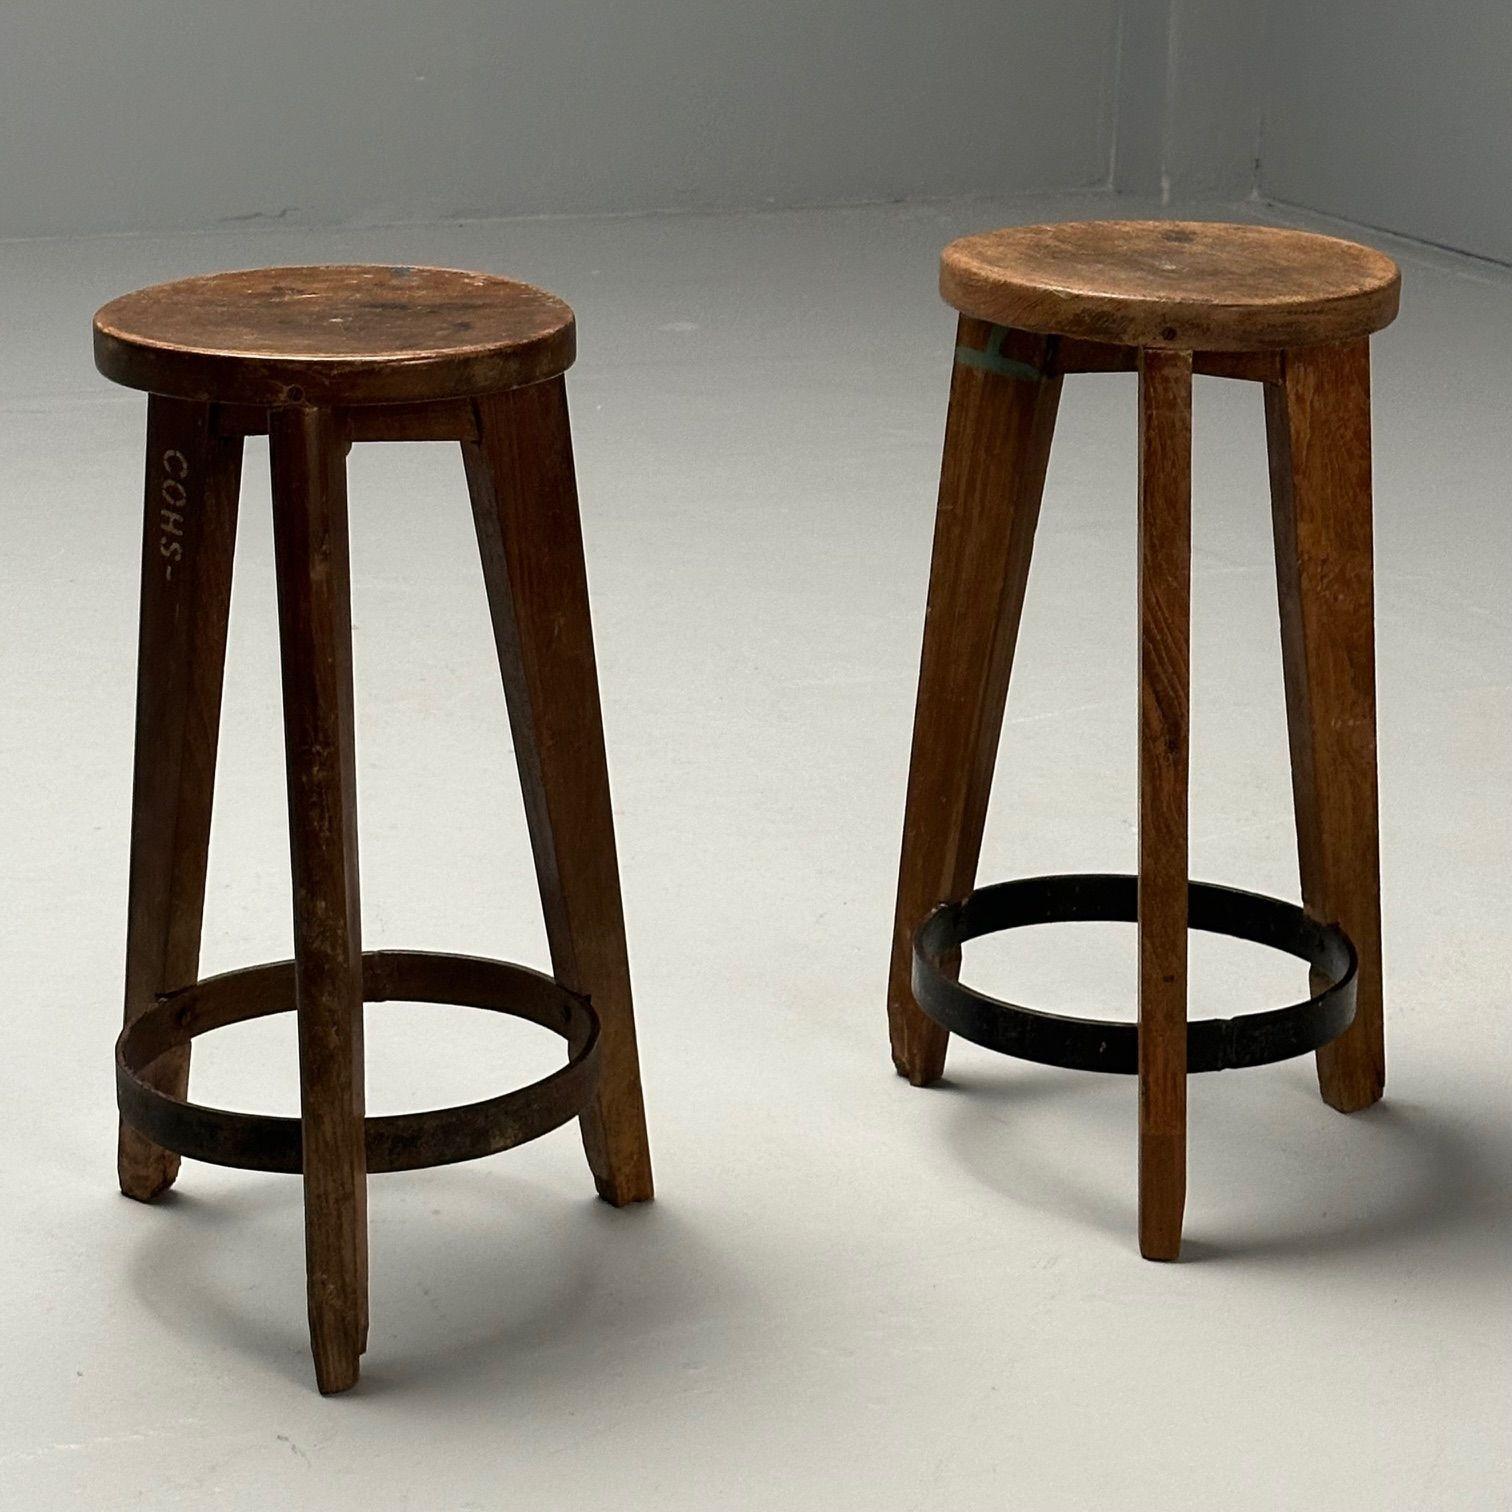 Mid-20th Century Pierre Jeanneret, French Mid-Century Modern, High Stools, Teak, Chandigarh For Sale